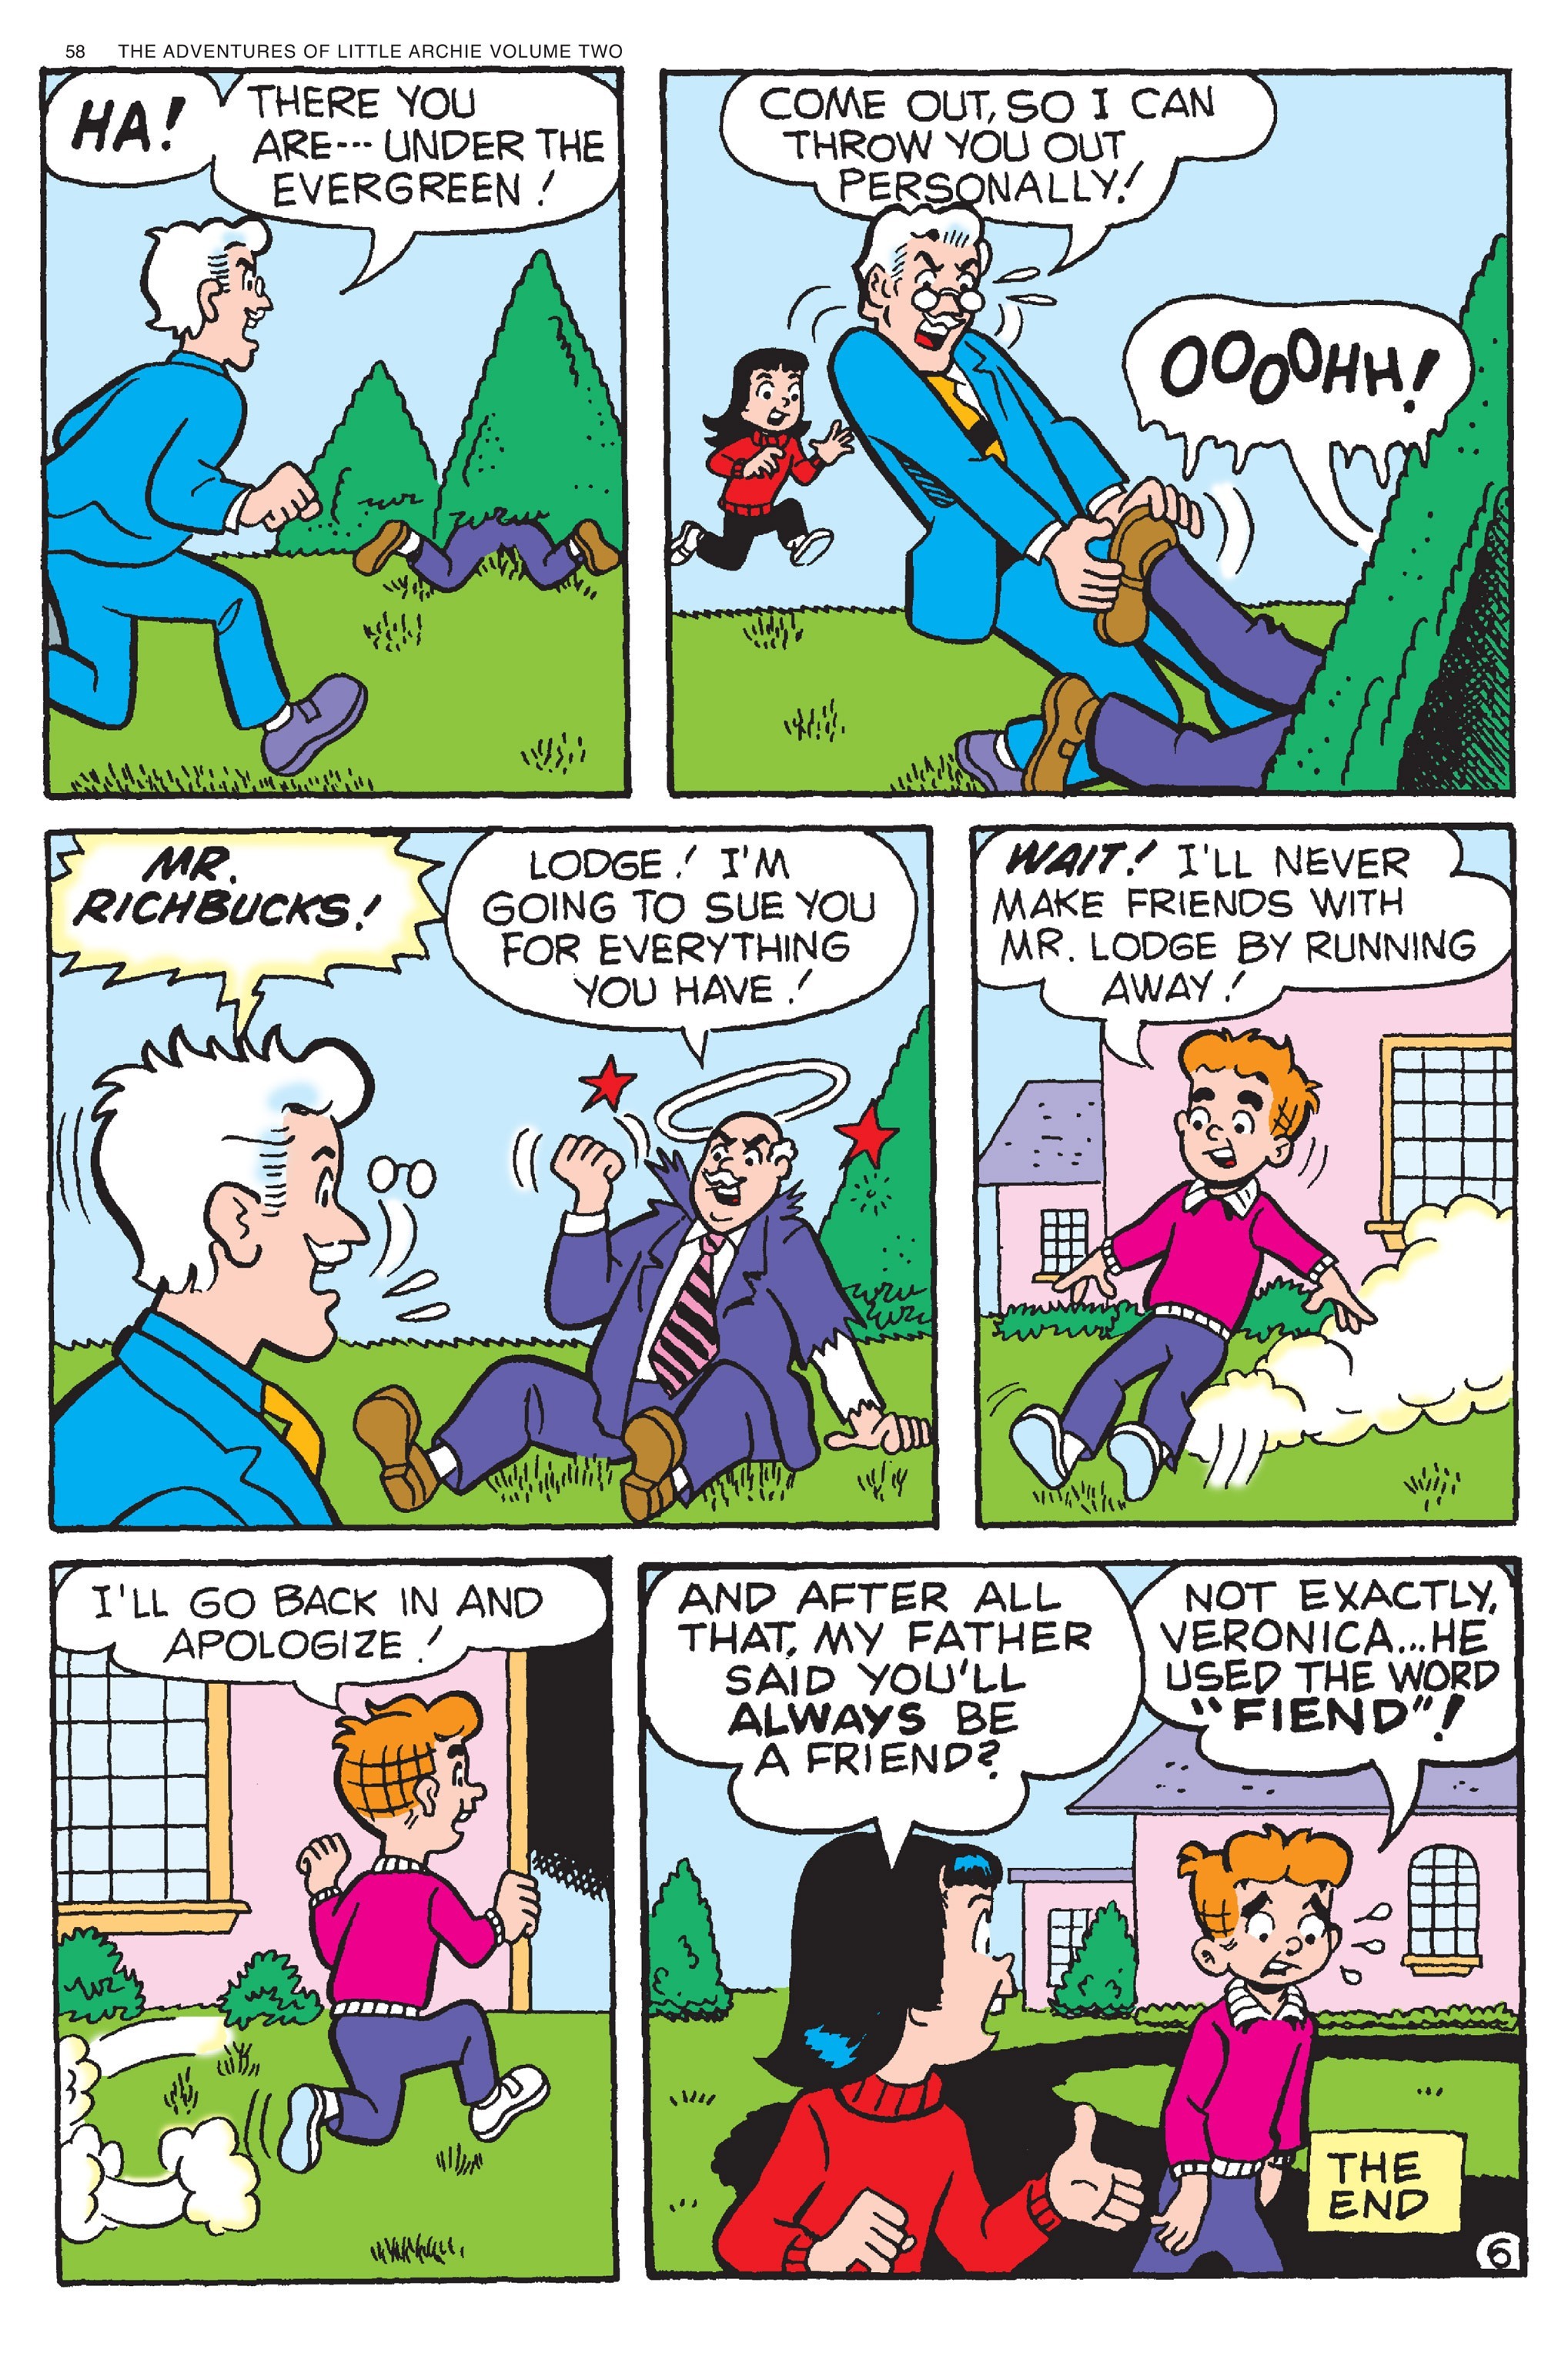 Read online Adventures of Little Archie comic -  Issue # TPB 2 - 59